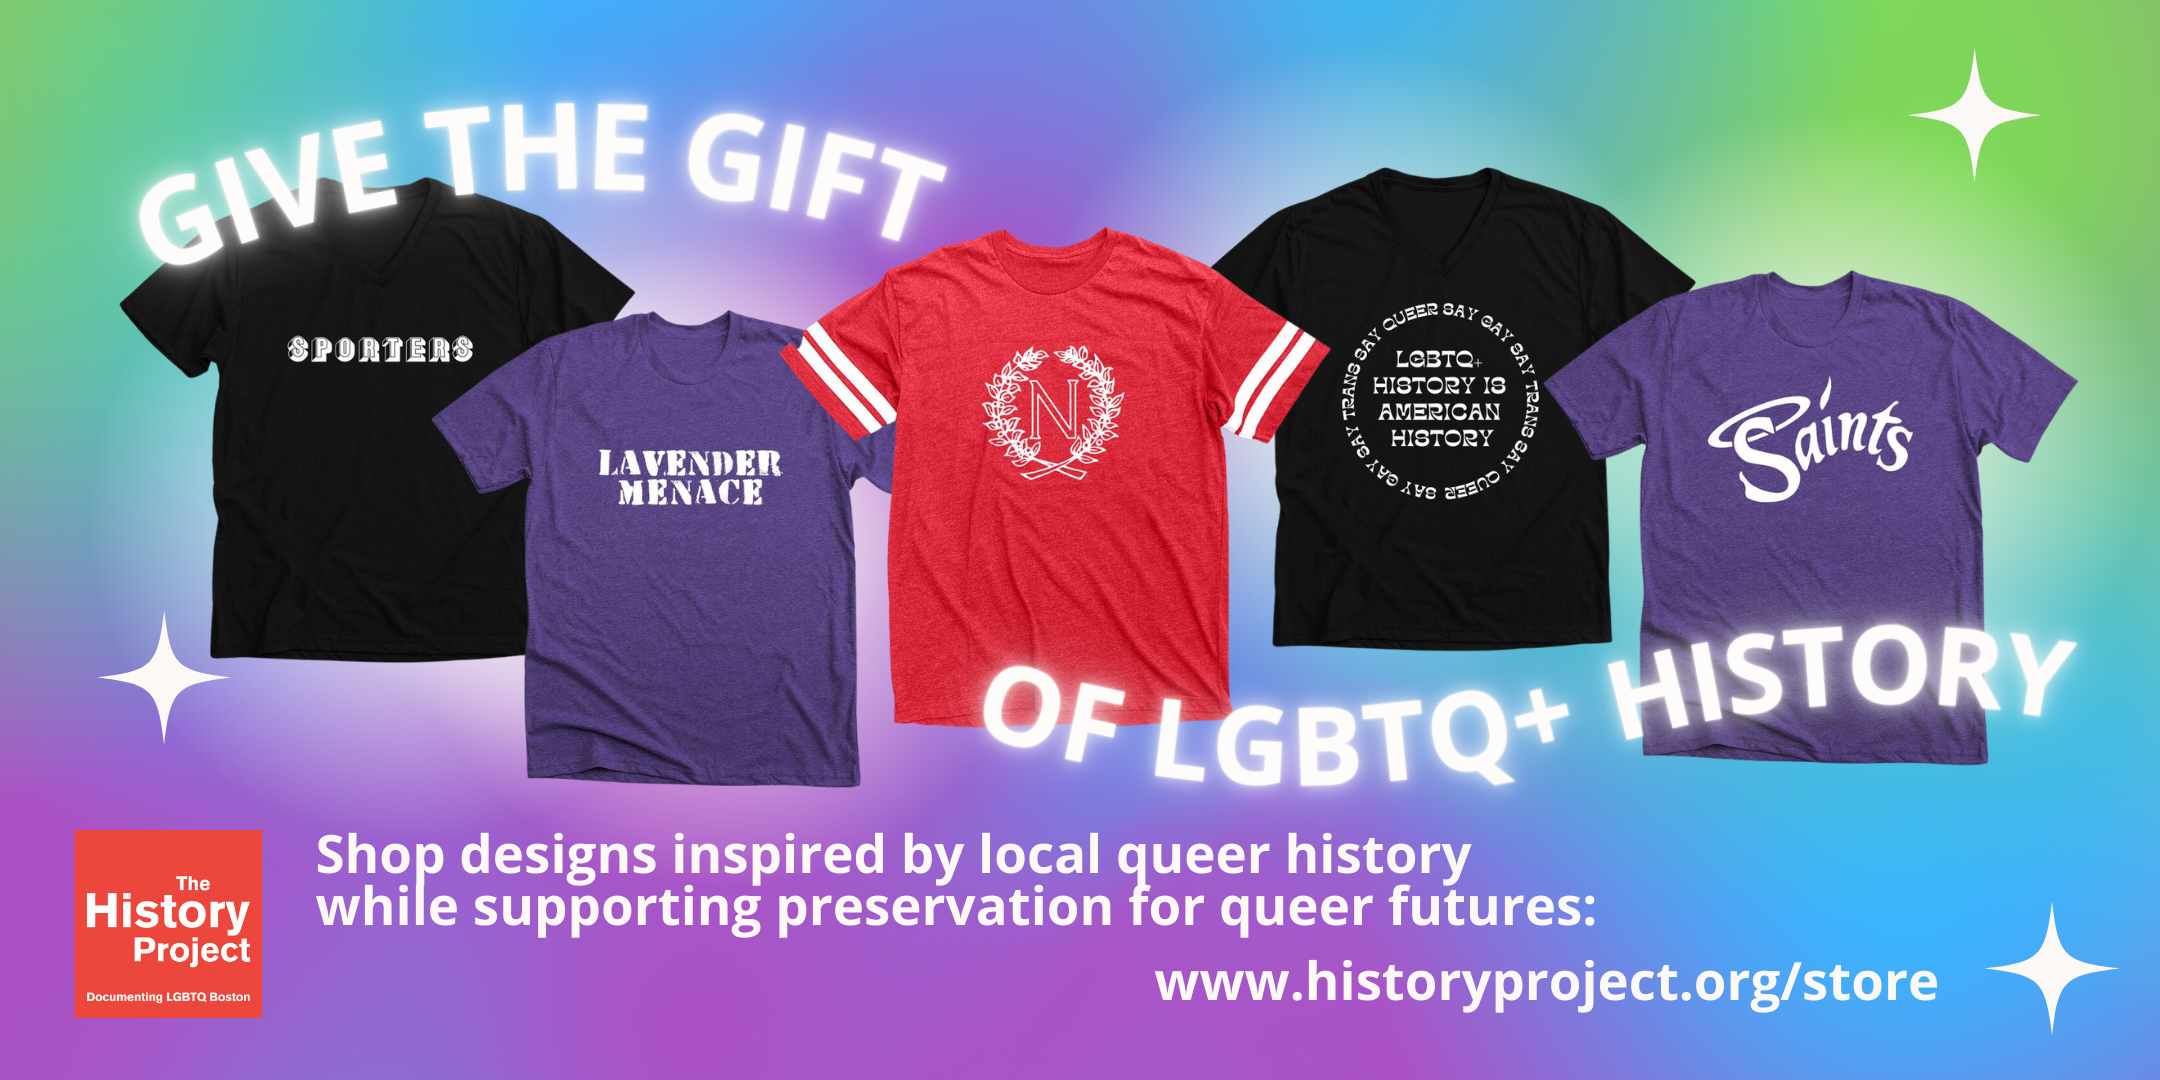 T-shirts from The History Project's store